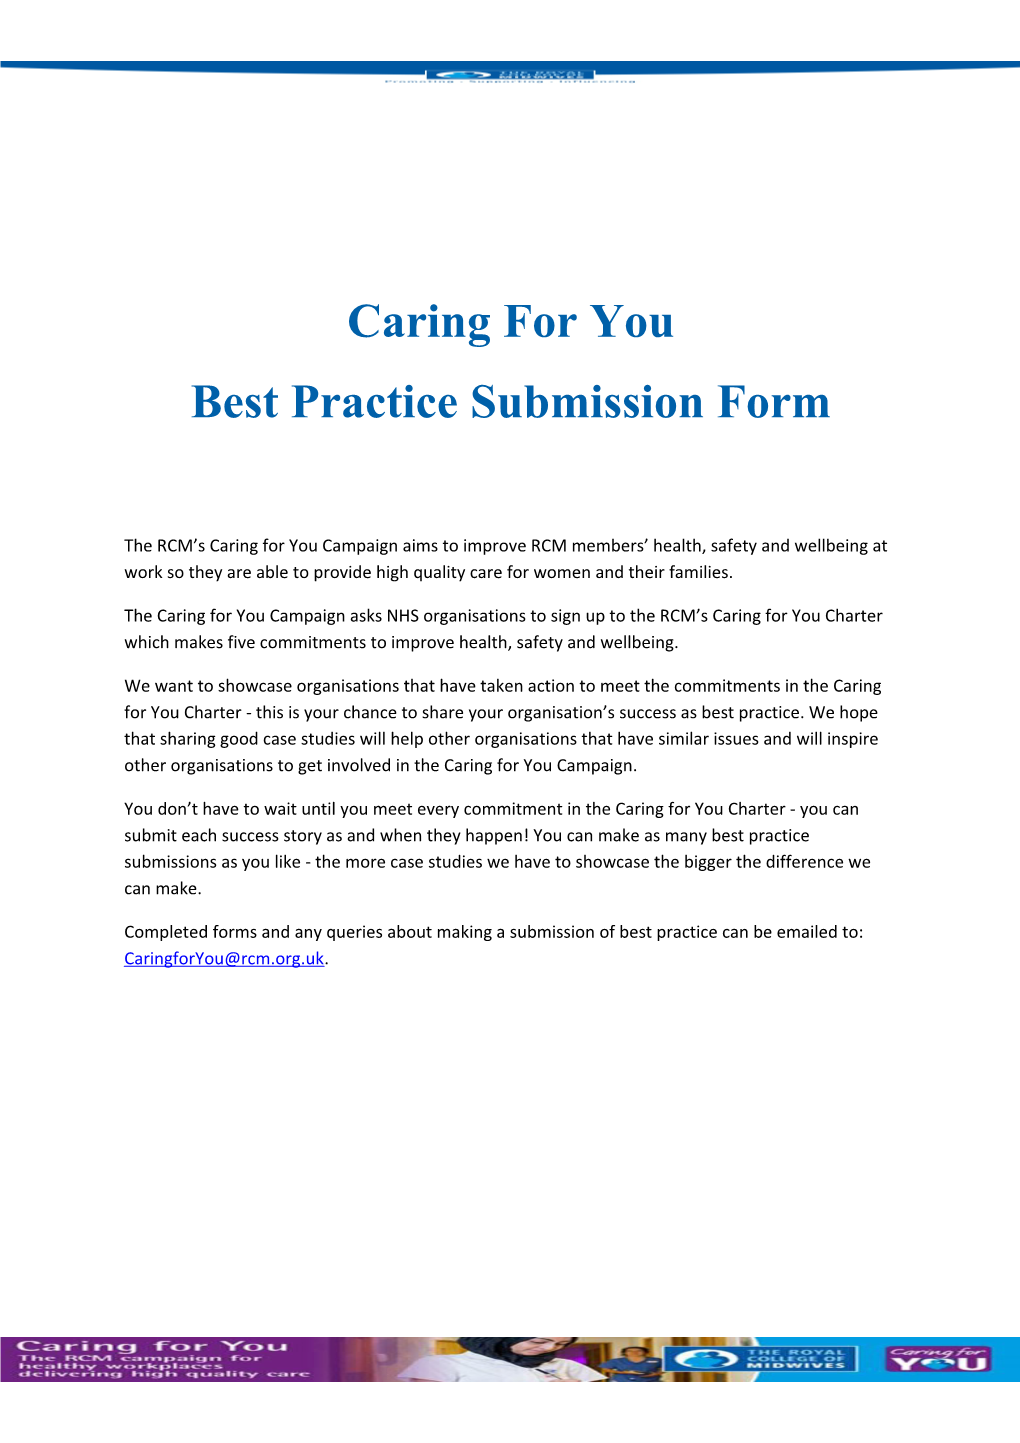 Best Practice Submission Form